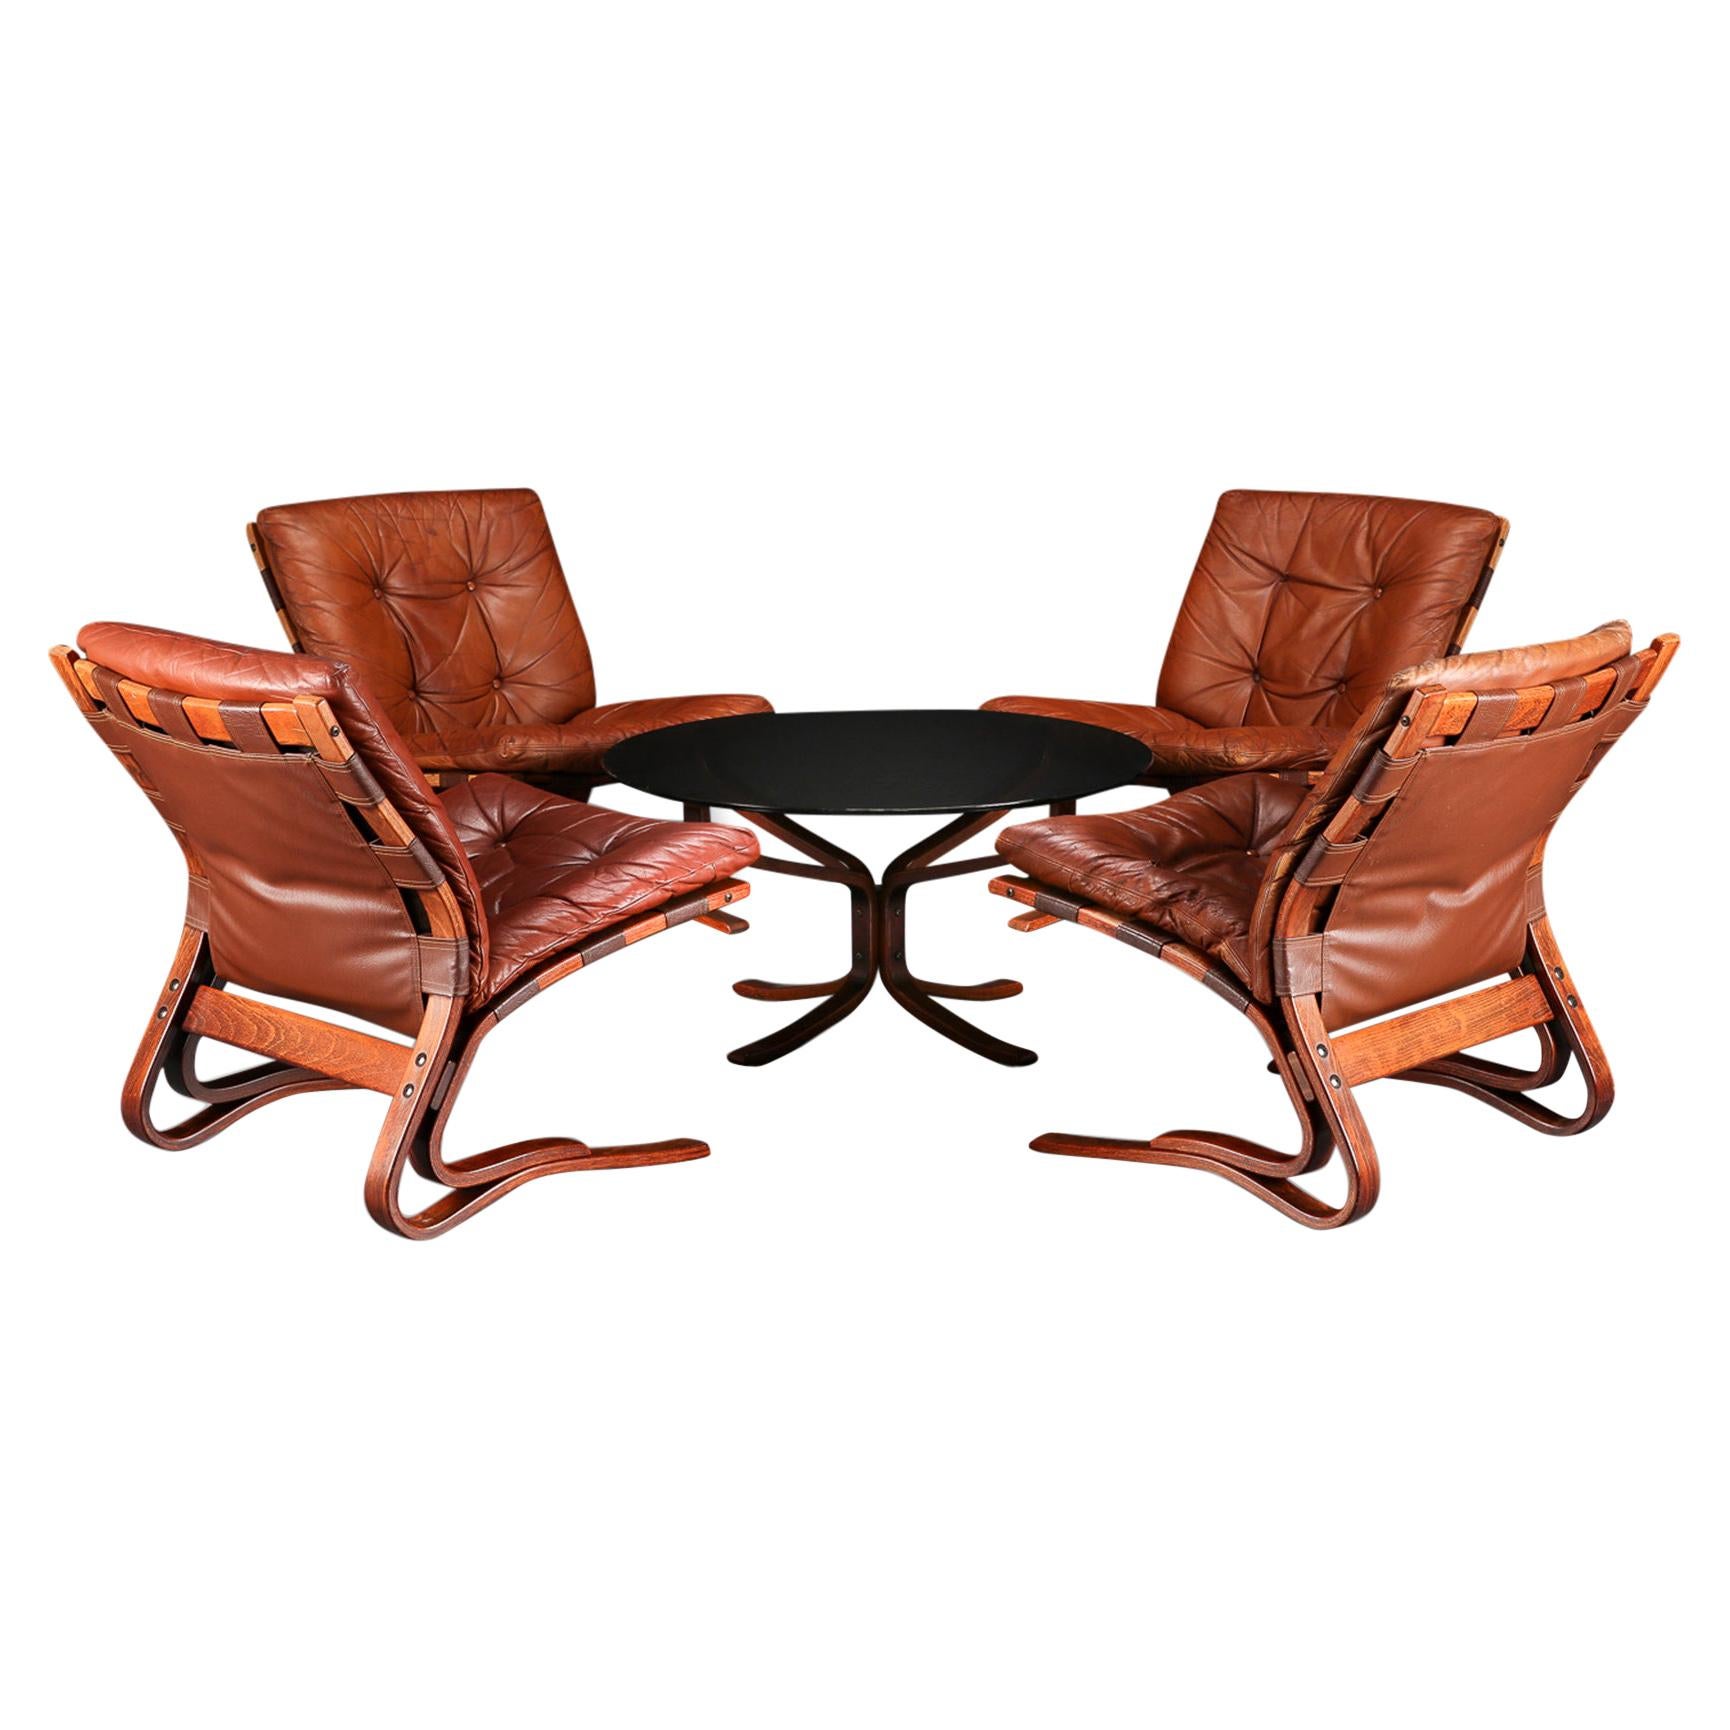 Set of Four ‘Skyline’ Bent Ply Lounge Chairs with Falcon Table